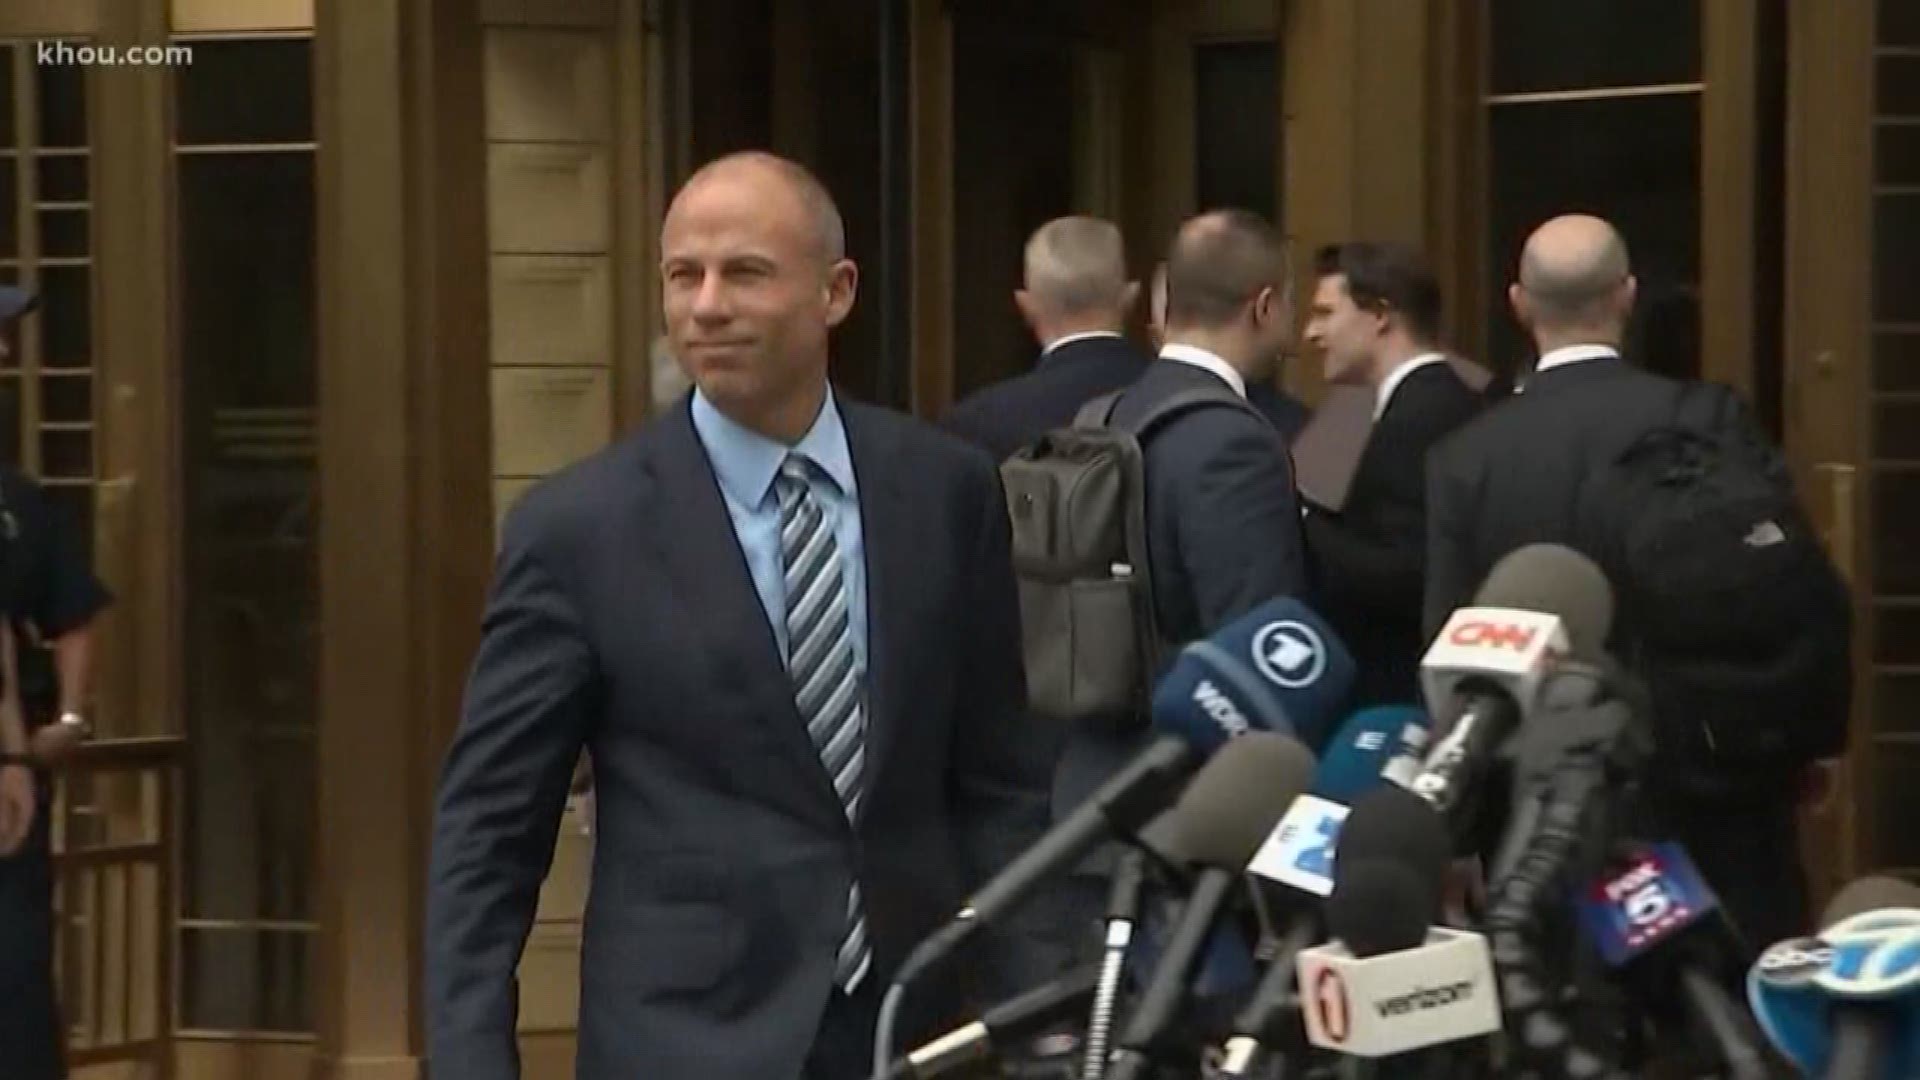 Attorney Michael Avenatti tweeted about a press conference and threatened Nike just minutes before he was arrested.